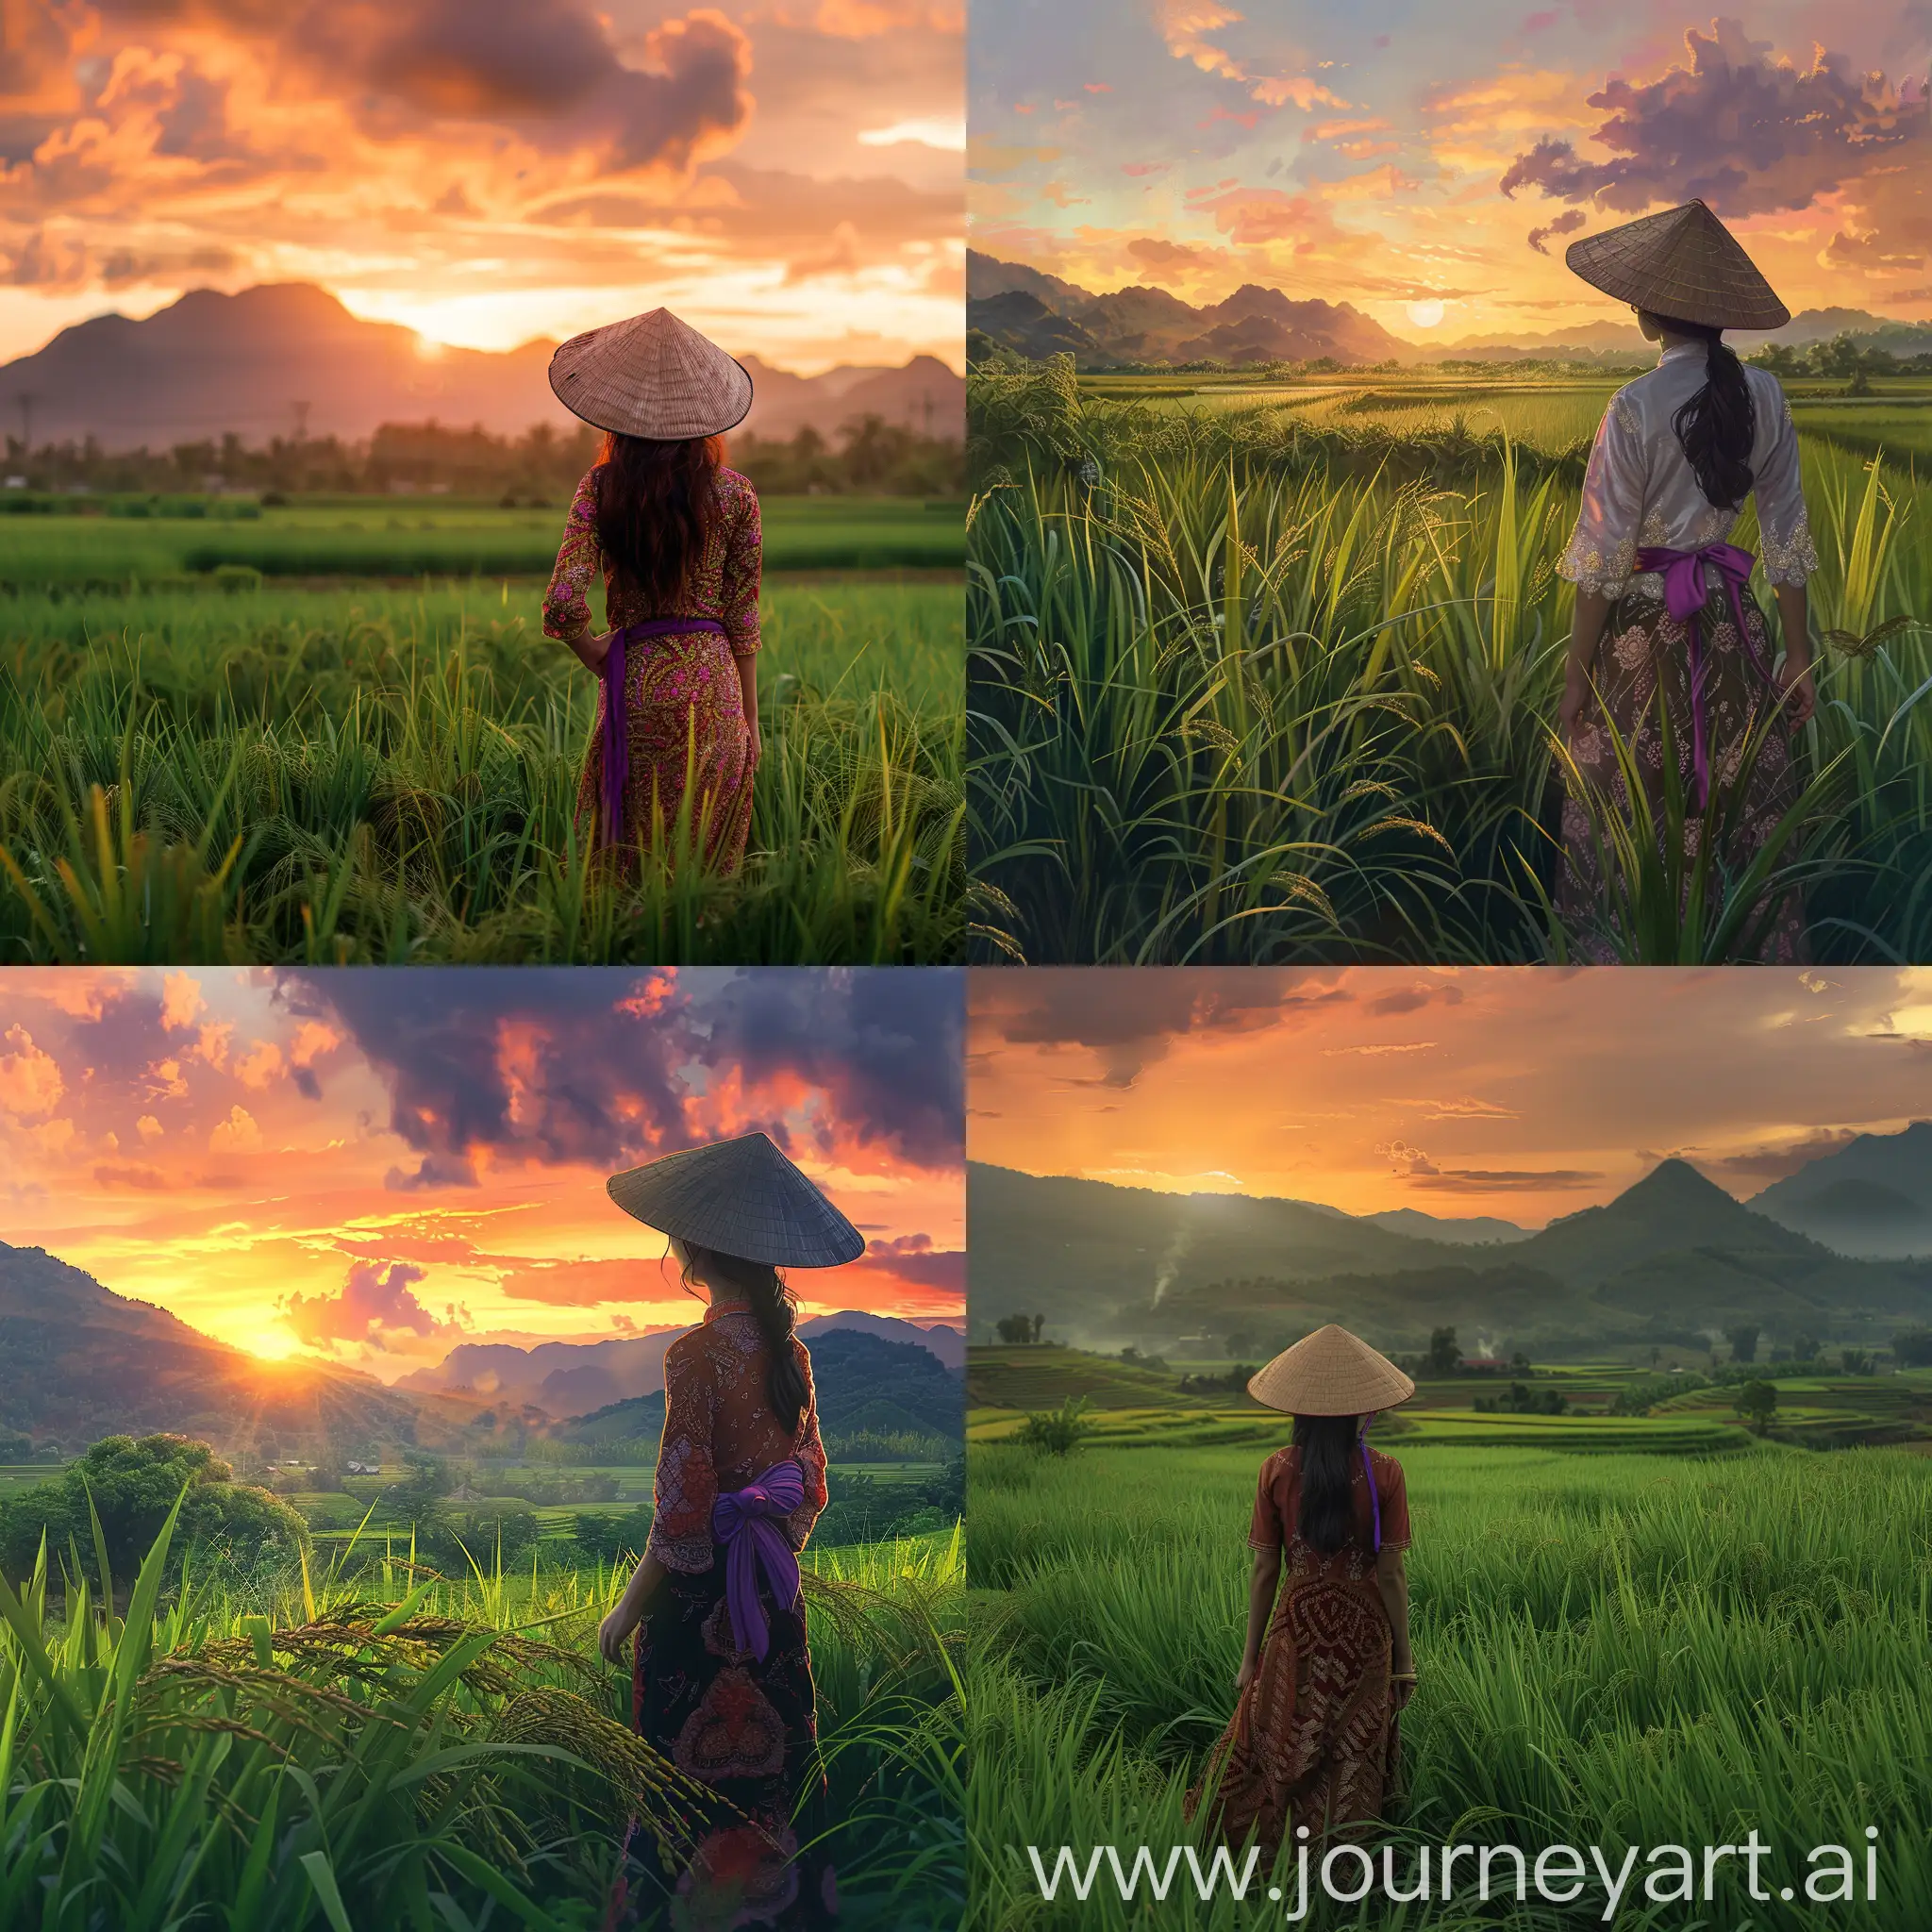 Vietnamese-Woman-in-Traditional-Dress-Standing-in-Lush-Green-Rice-Field-at-Sunset